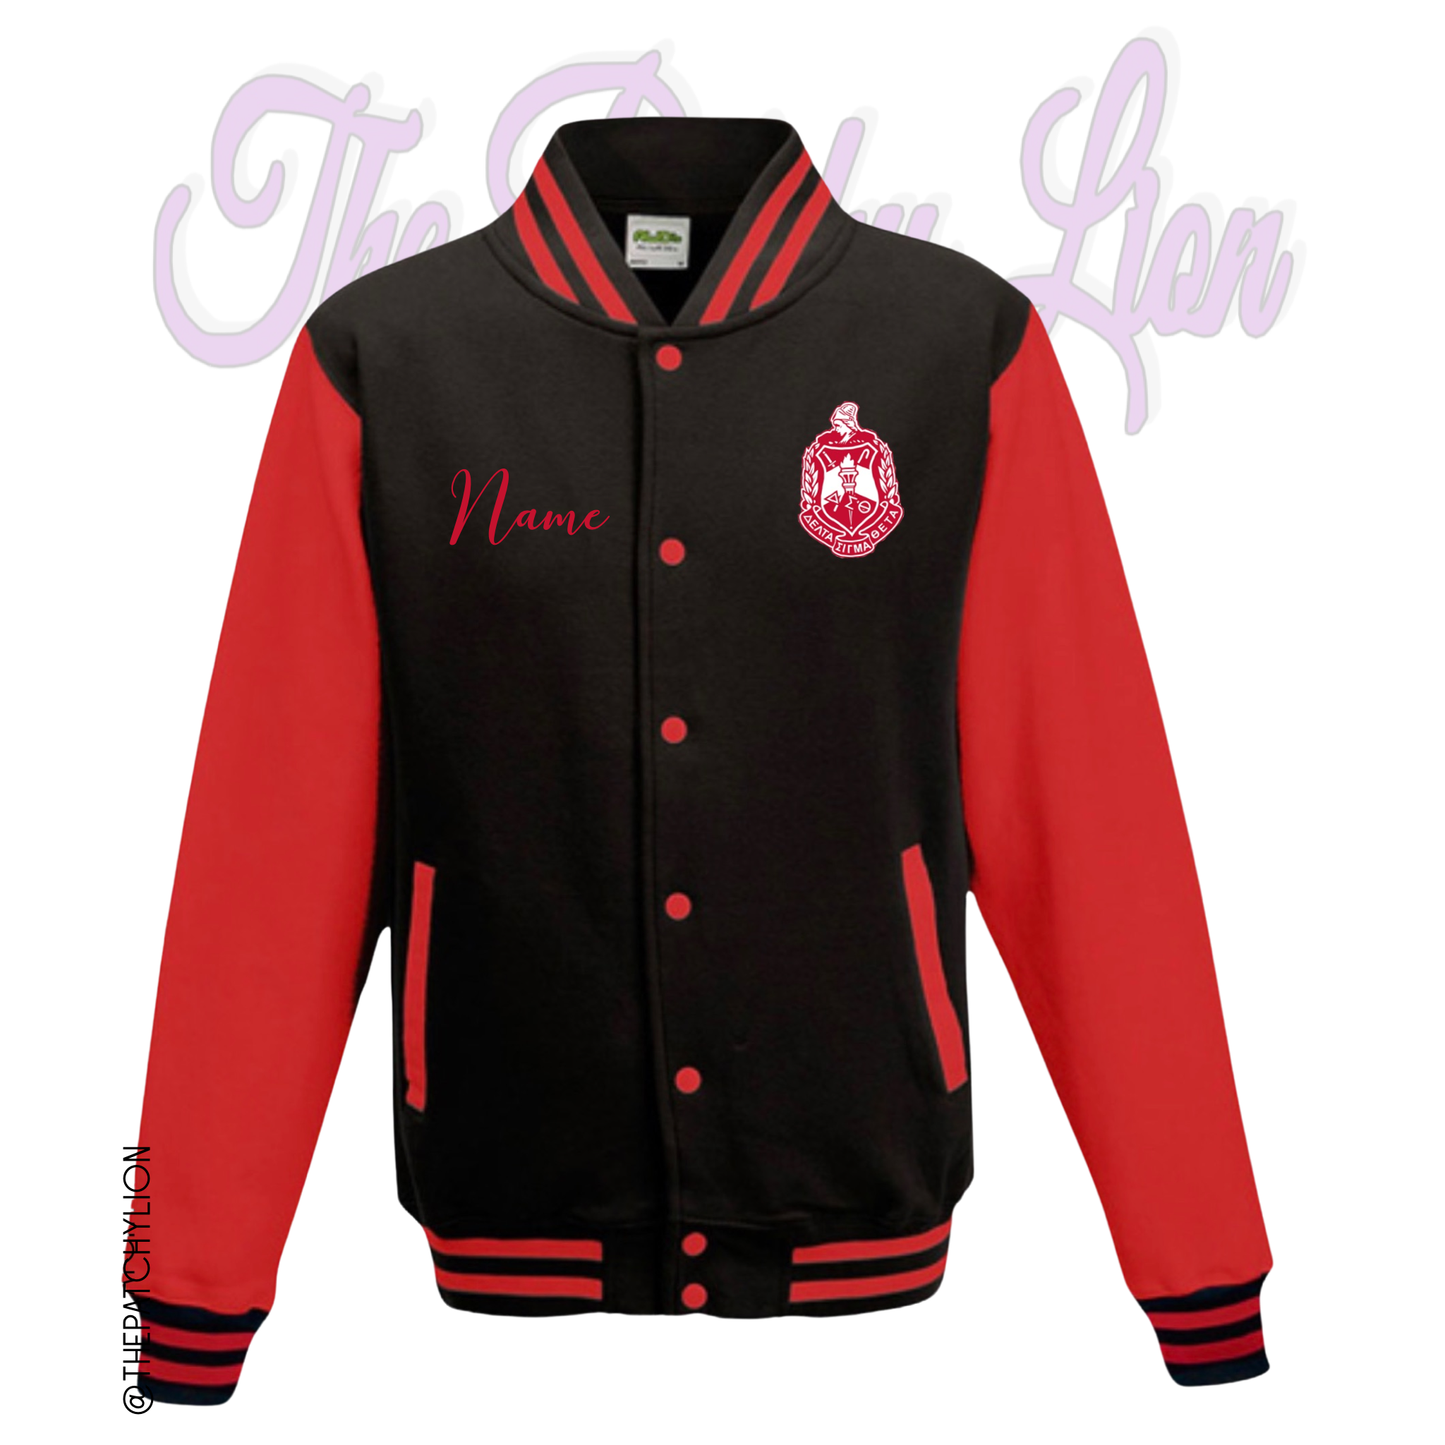 Delta Embroidered Letterman Jacket | Free Shipping